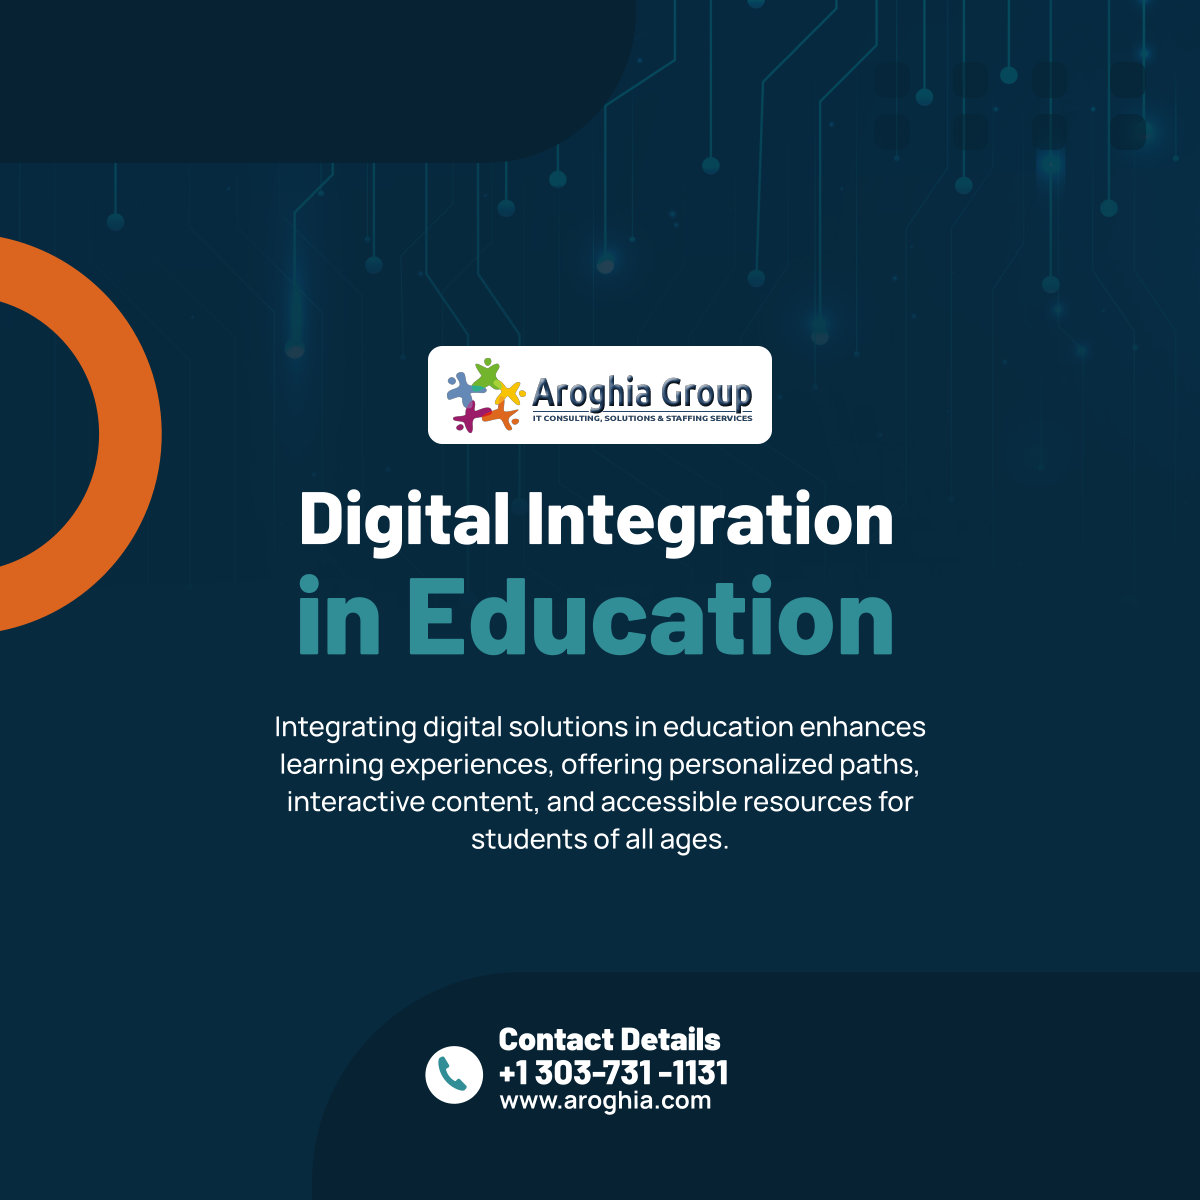 Transform educational landscapes with digital integration. Personalized learning paths and interactive resources make education more accessible and engaging for students everywhere.

#AuroraCO #ITServices #DigitalEducation #LearningTransformation #InteractiveLearning